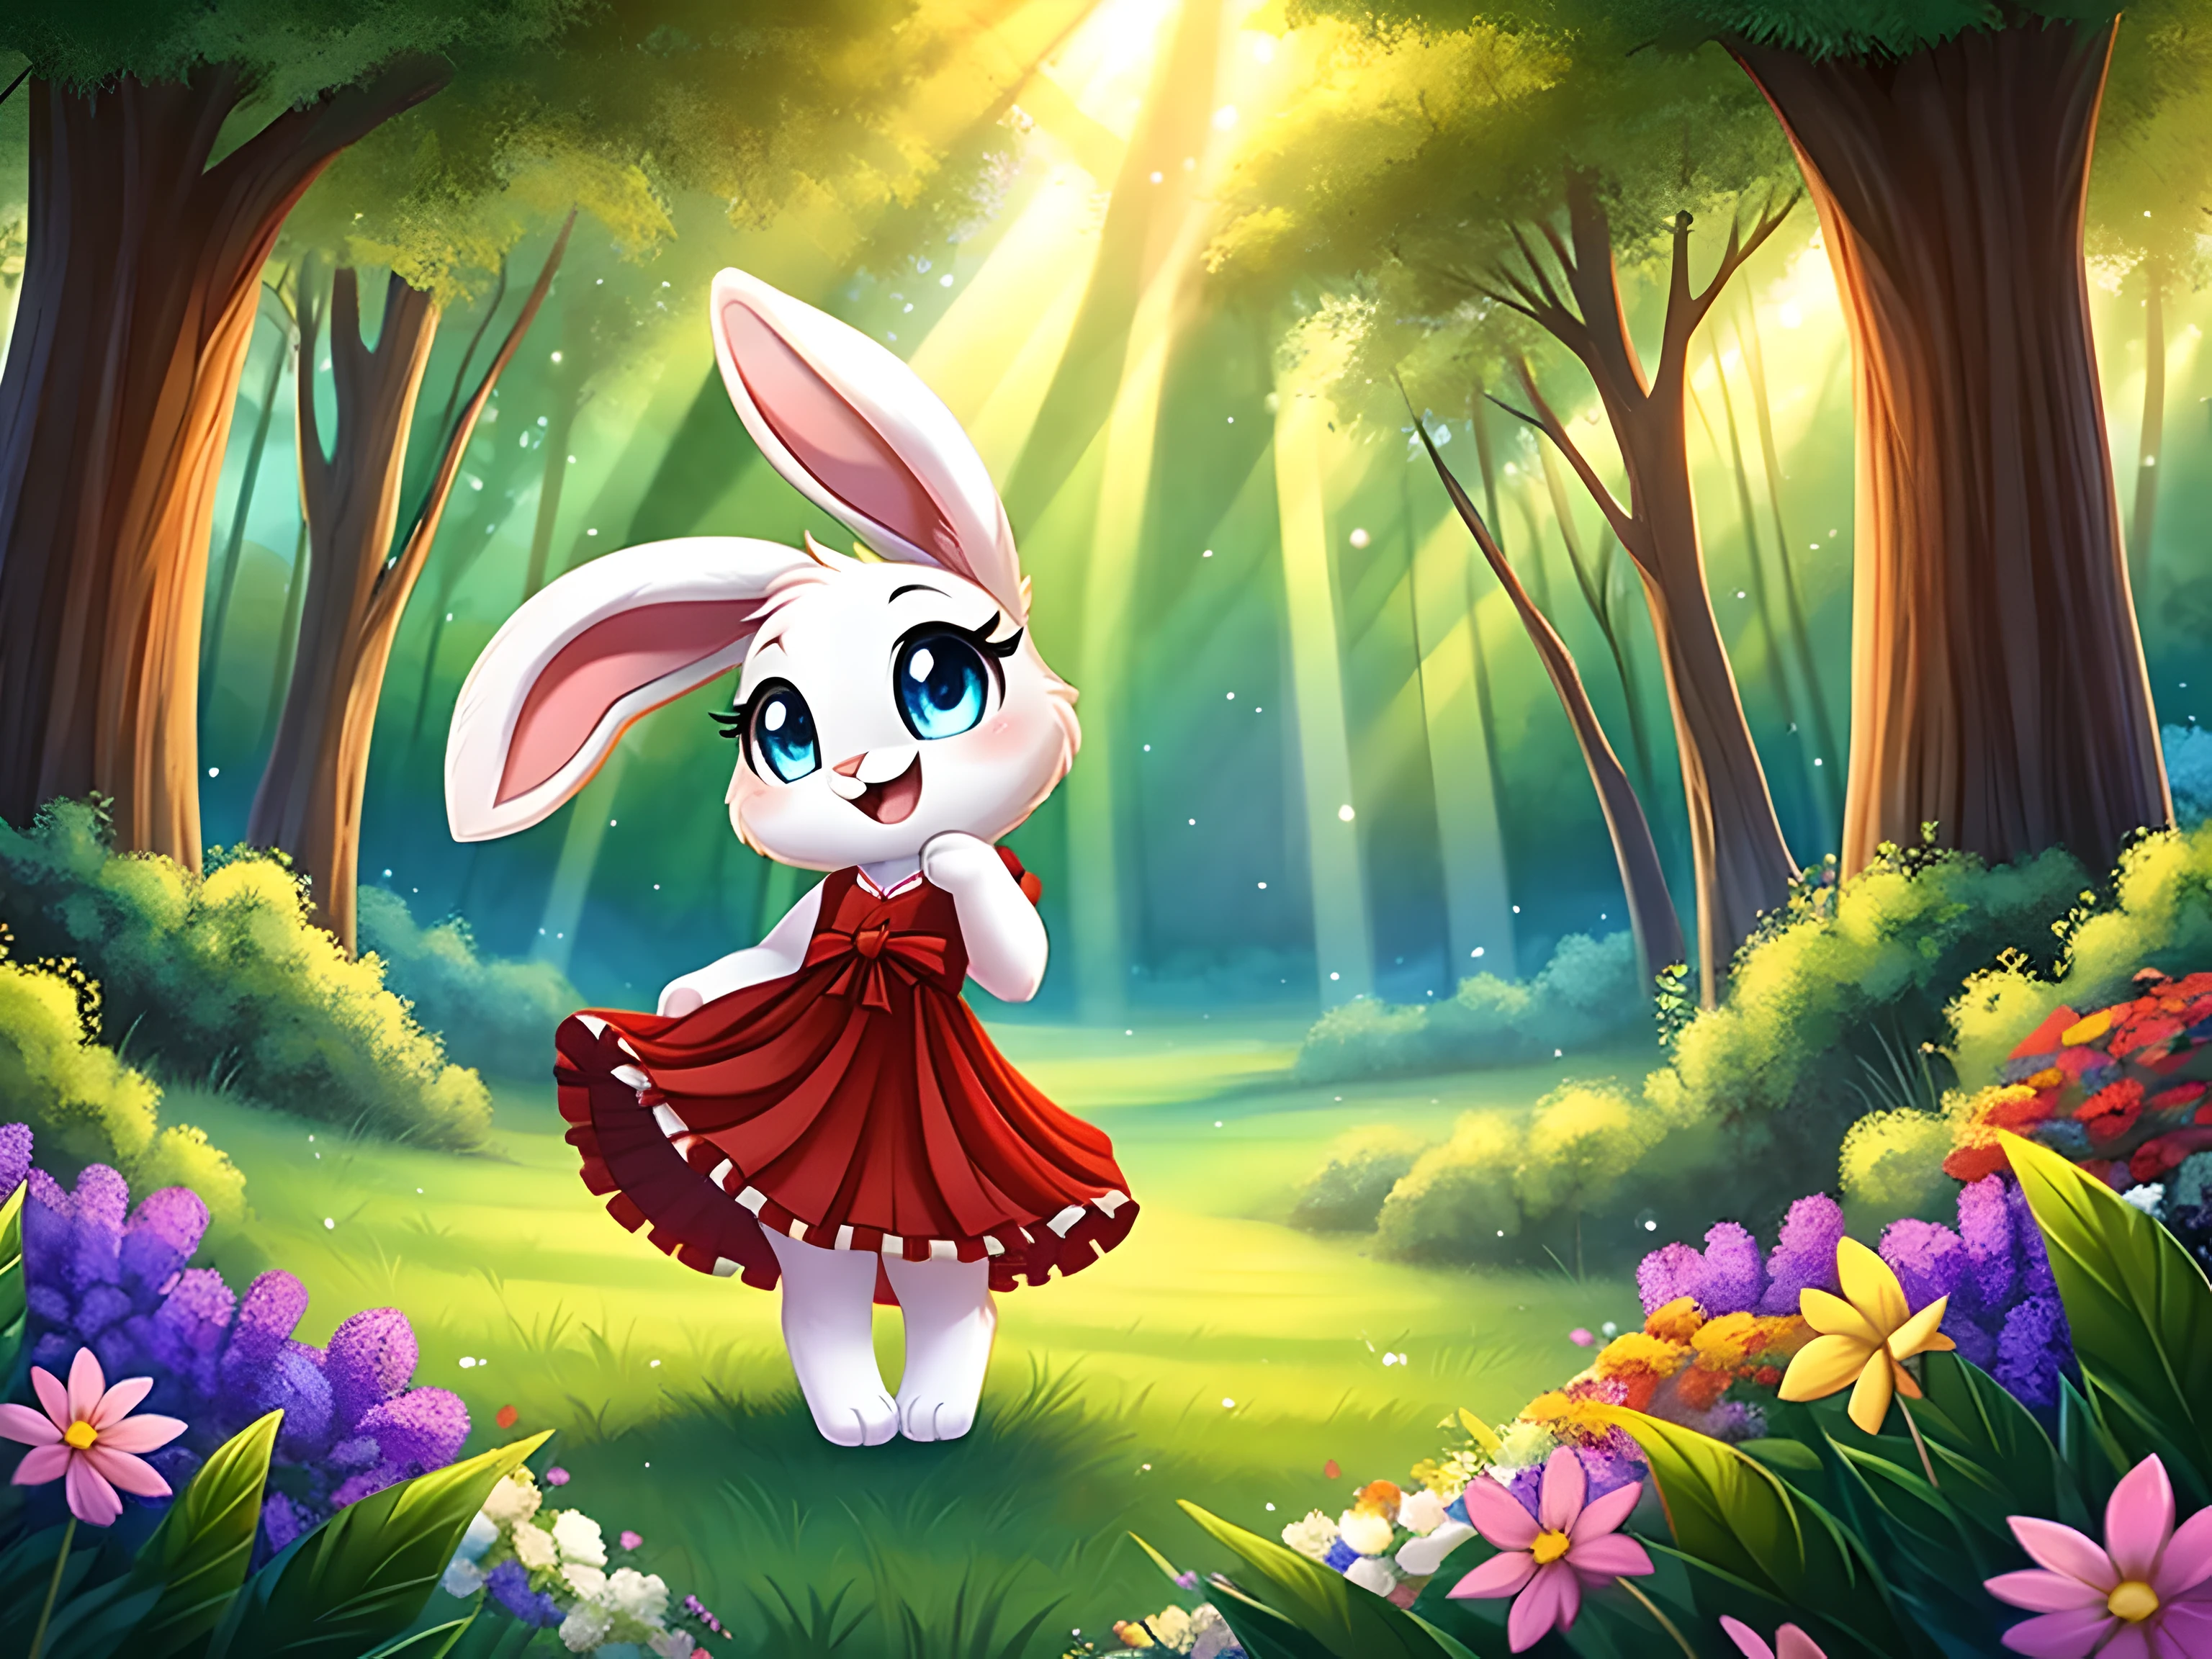 zoomed out image, cute style art, fantasy style art, cute, adorable, short character, small, tiny little fluffy female white bunny with blue eyes, 4 ears, 2 extra ears, big floppy ears, long ears, ears perked up, raised ears, long eyelashes, poofy rabbit tail, wearing a red frilly ribbon dress, smiling, standing in a colorful fantasy forest, soft tones, big expressive smile, open mouth, wide eyes, excited eyes, excited face, stunning visuals, sunlight coming through the trees, flowers scattered in the bushes, butterflies in the air, digital illustration